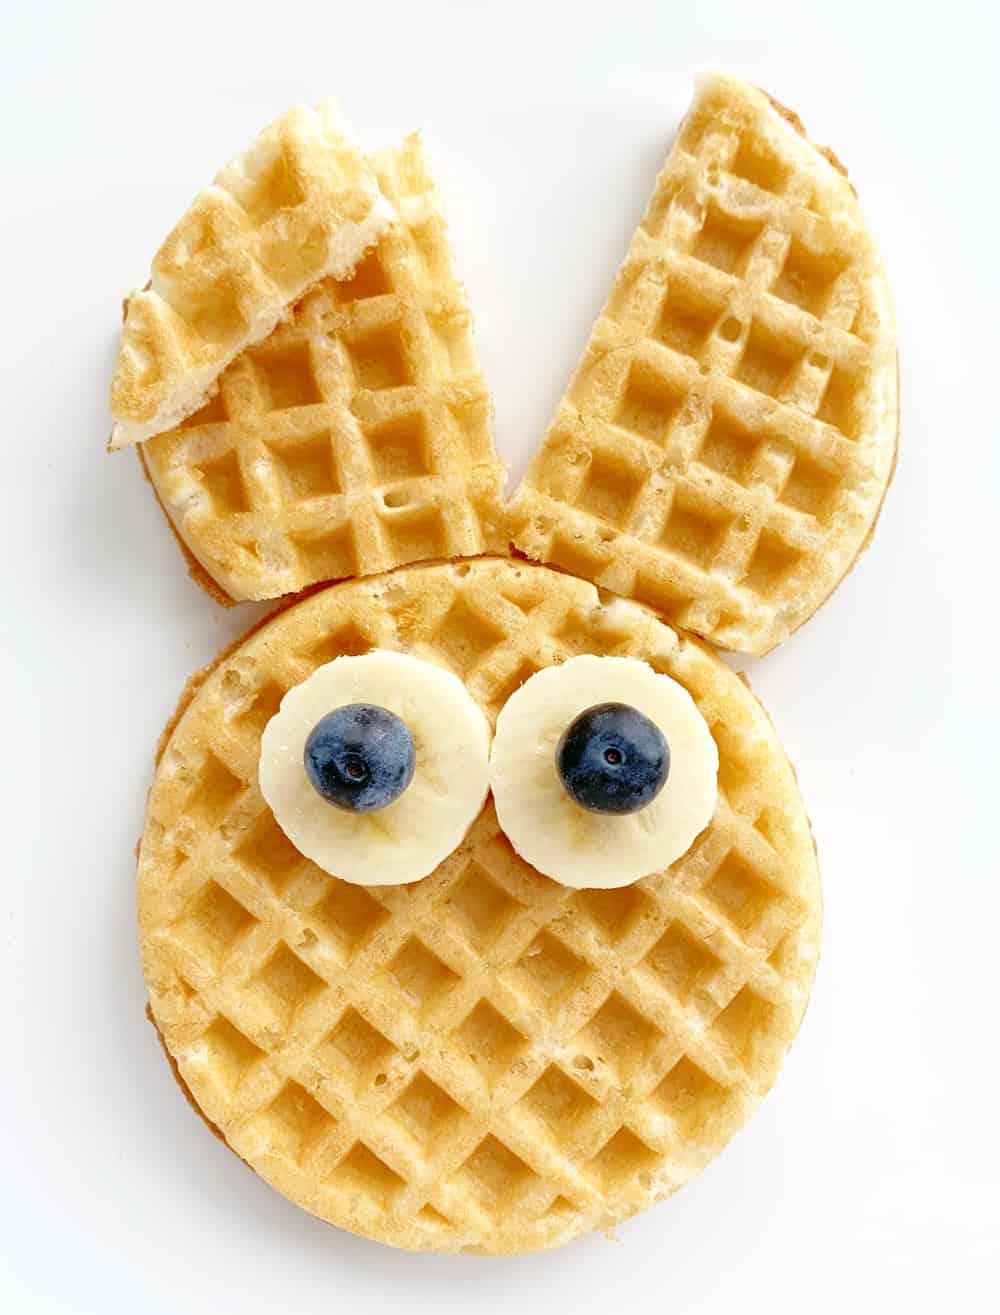 Waffle Wow! RNAB09BZVJMY2 easter bunny mini waffle maker - make holiday  breakfast special for kids & adults w cute bunny waffles or pancakes-  individua